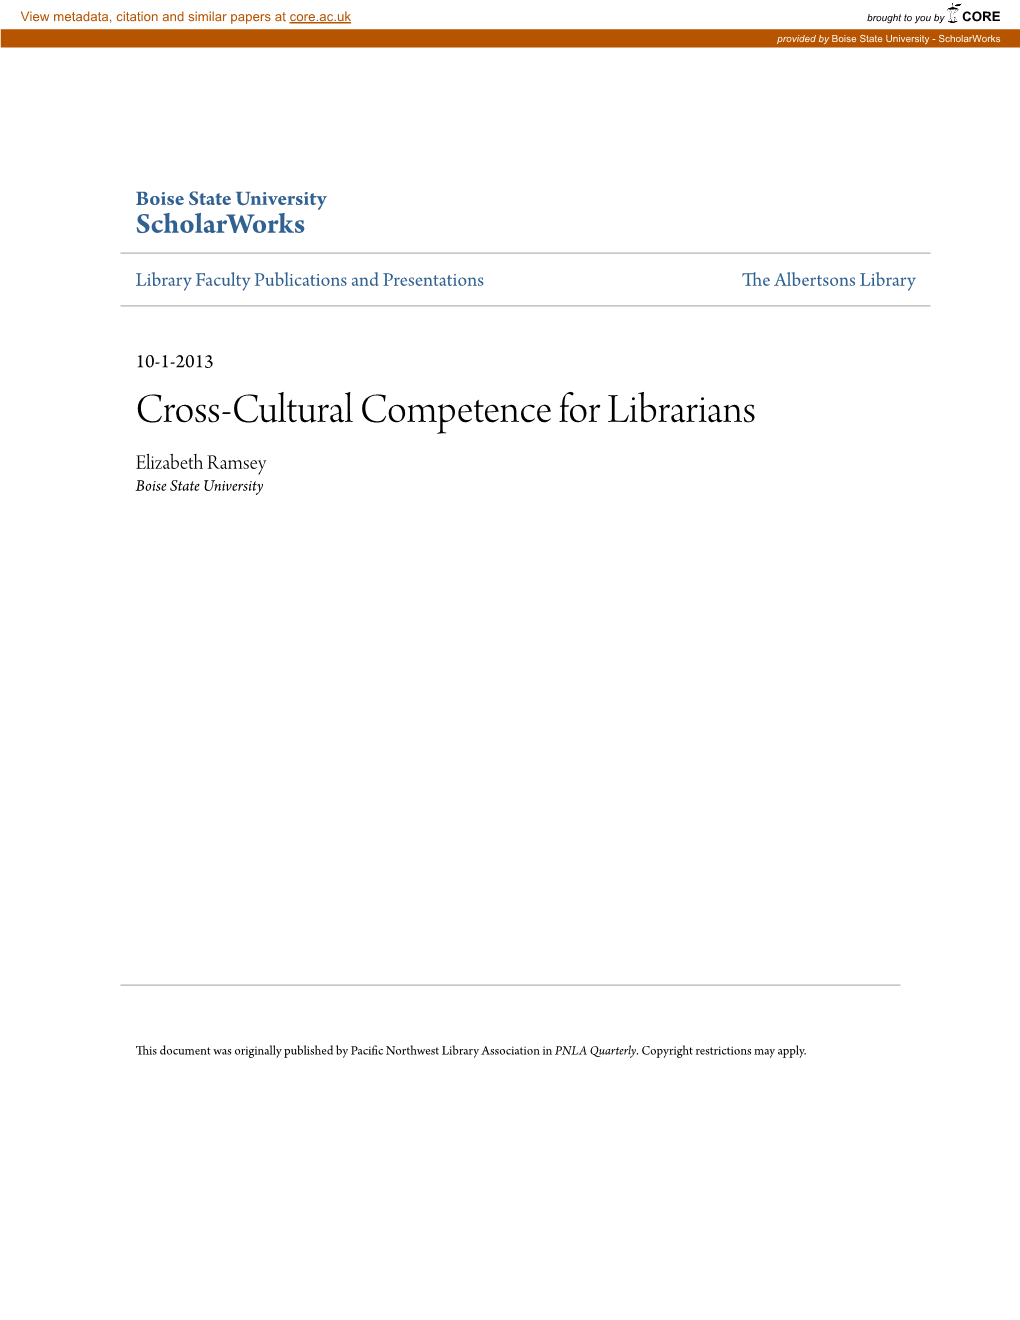 Cross-Cultural Competence for Librarians Elizabeth Ramsey Boise State University